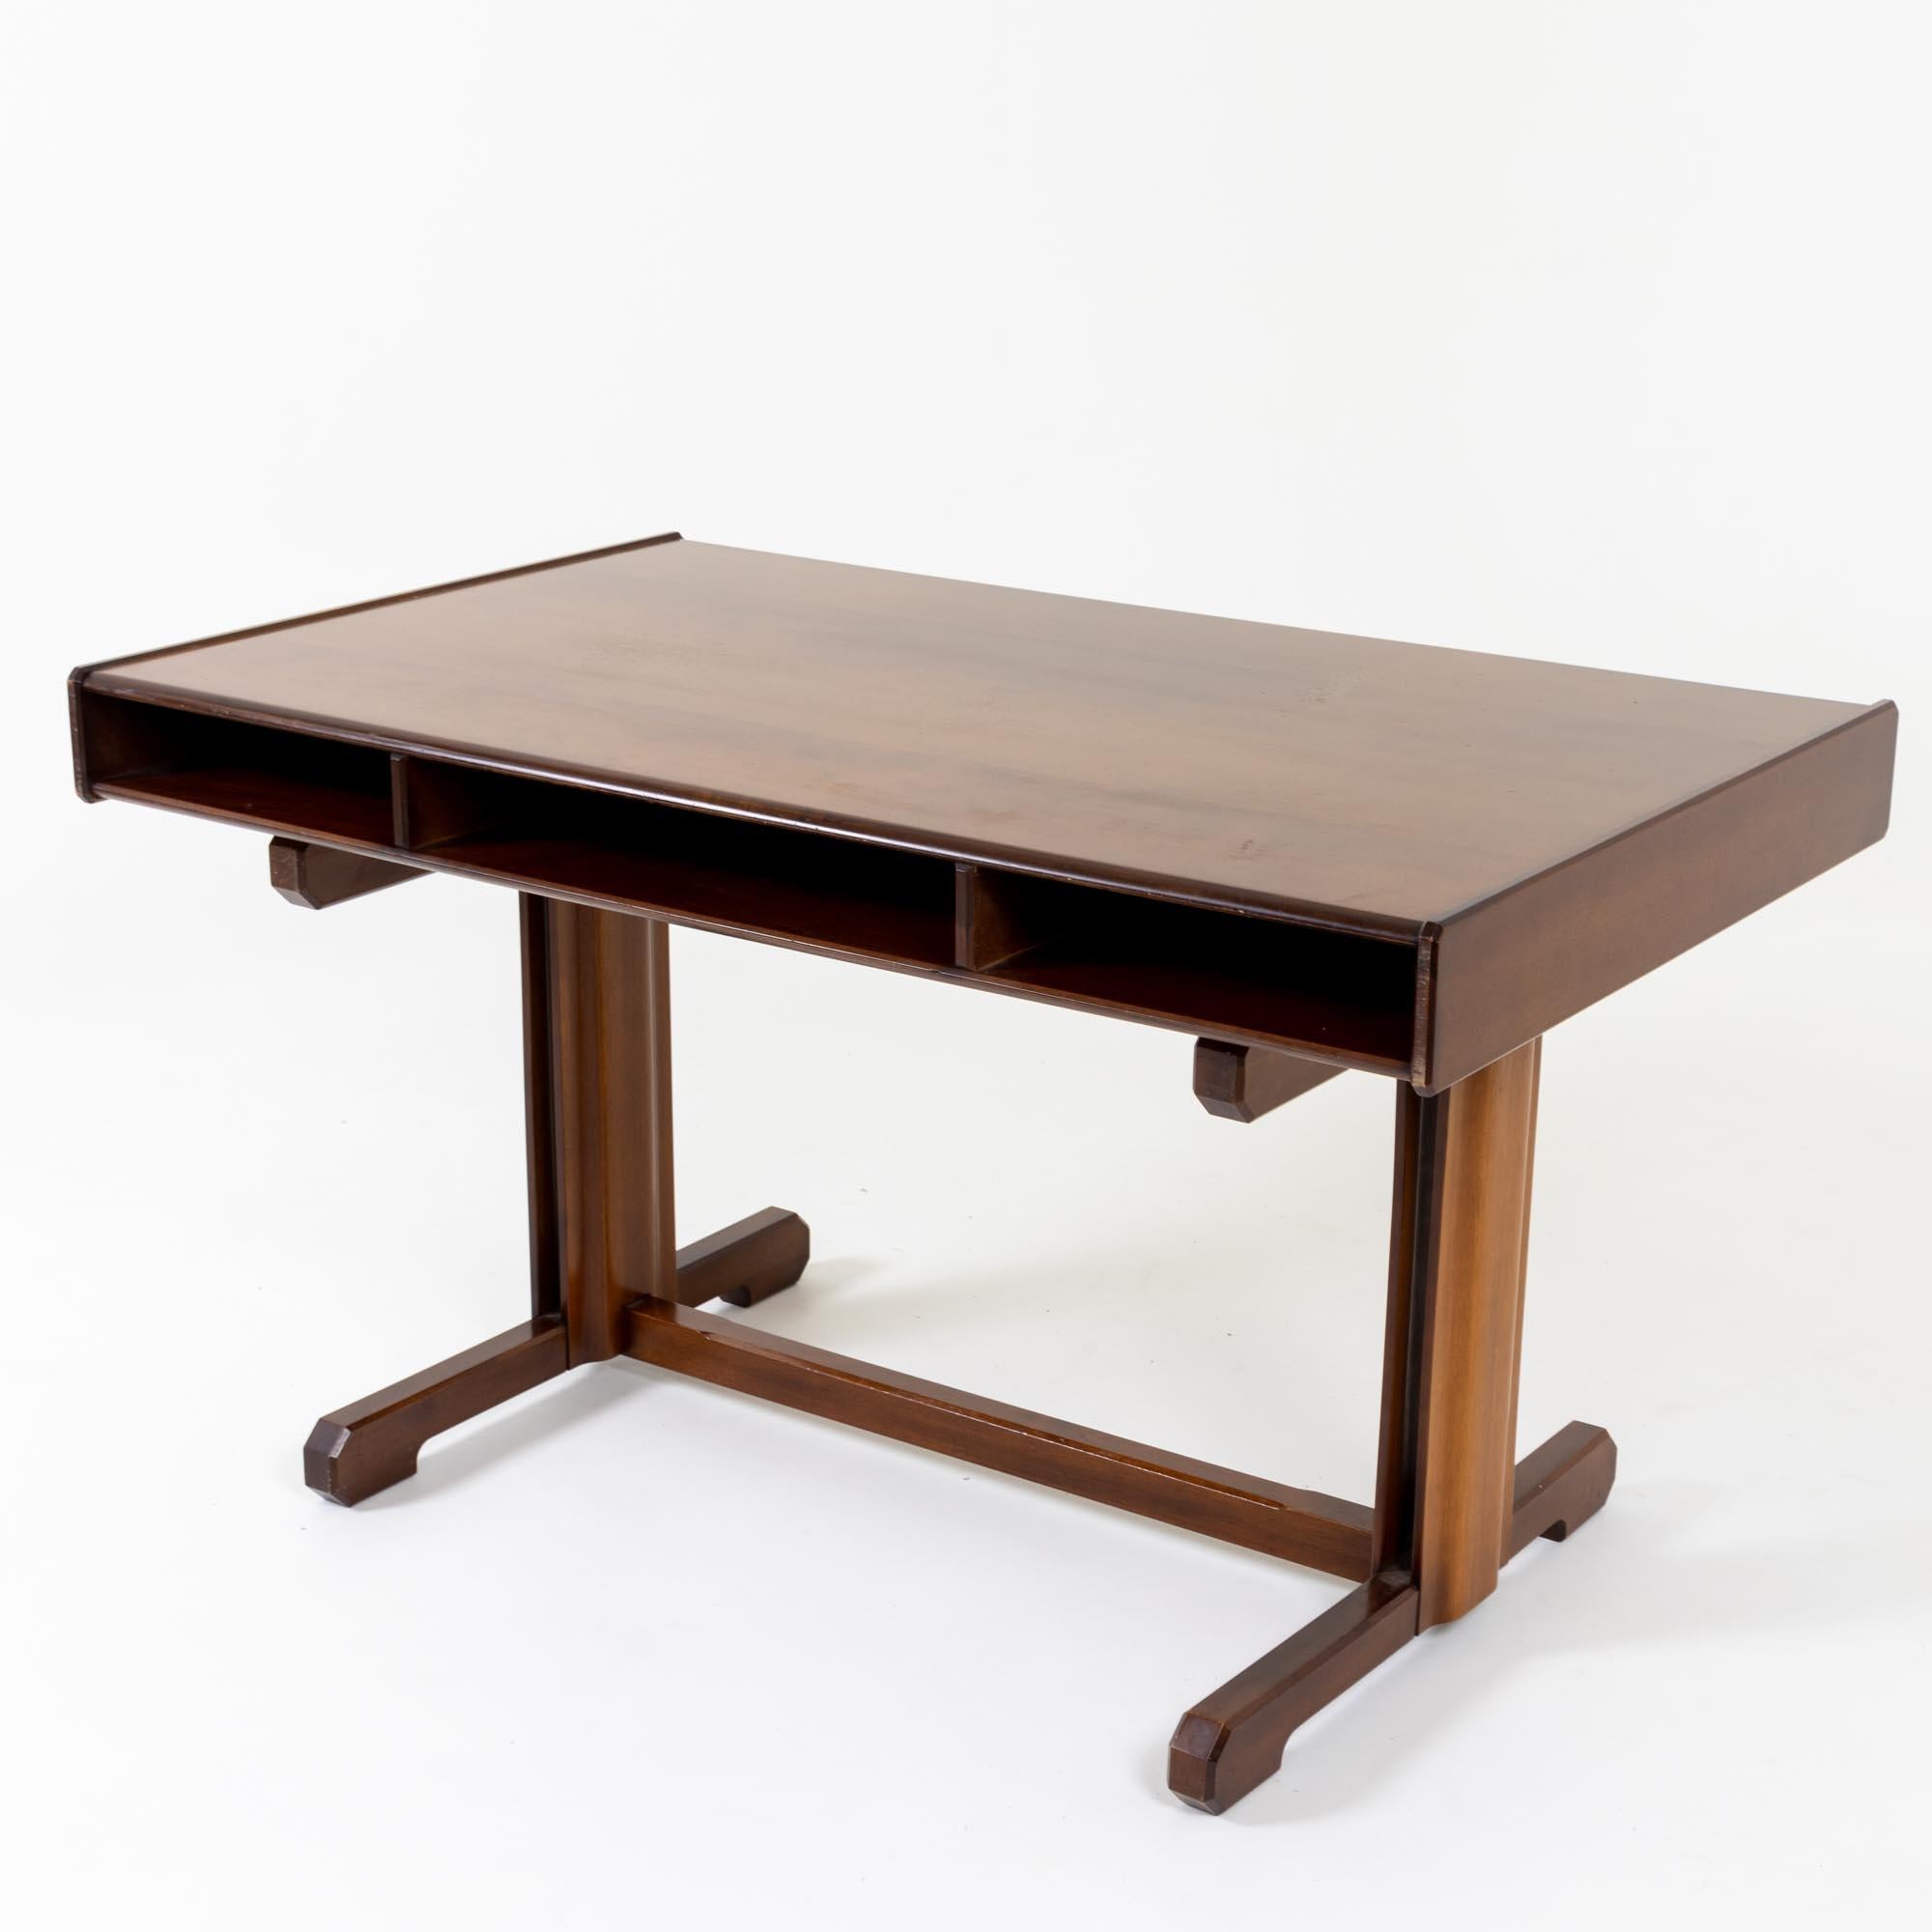 Dark brown desk with two drawers designed by Gianfranco Frattini in the 1950s. The desk stands on a solid base with H-shaped bracing. The rectangular tabletop features two drawers with round knobs and a central storage compartment on the front.